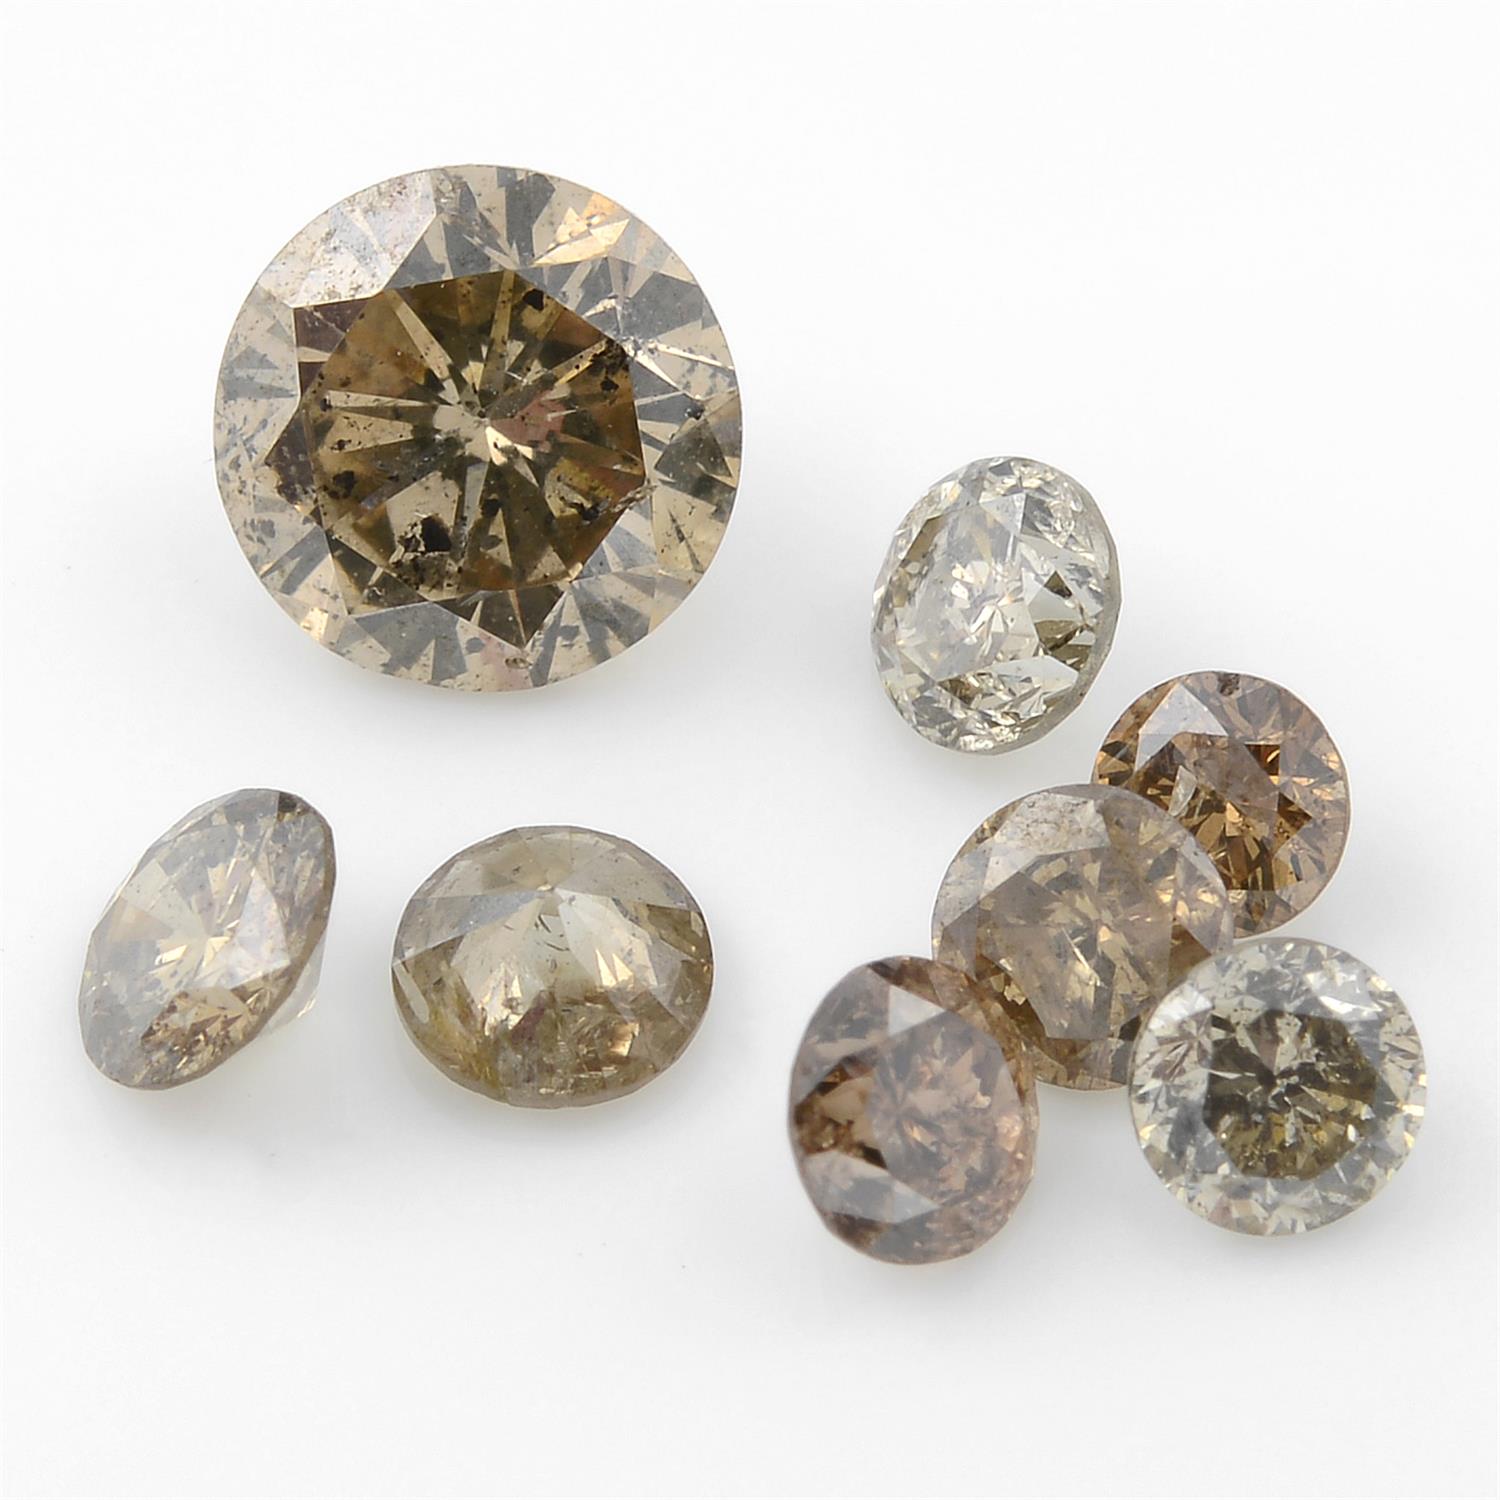 Selection of diamonds and black gemstones, weighing 14.74ct